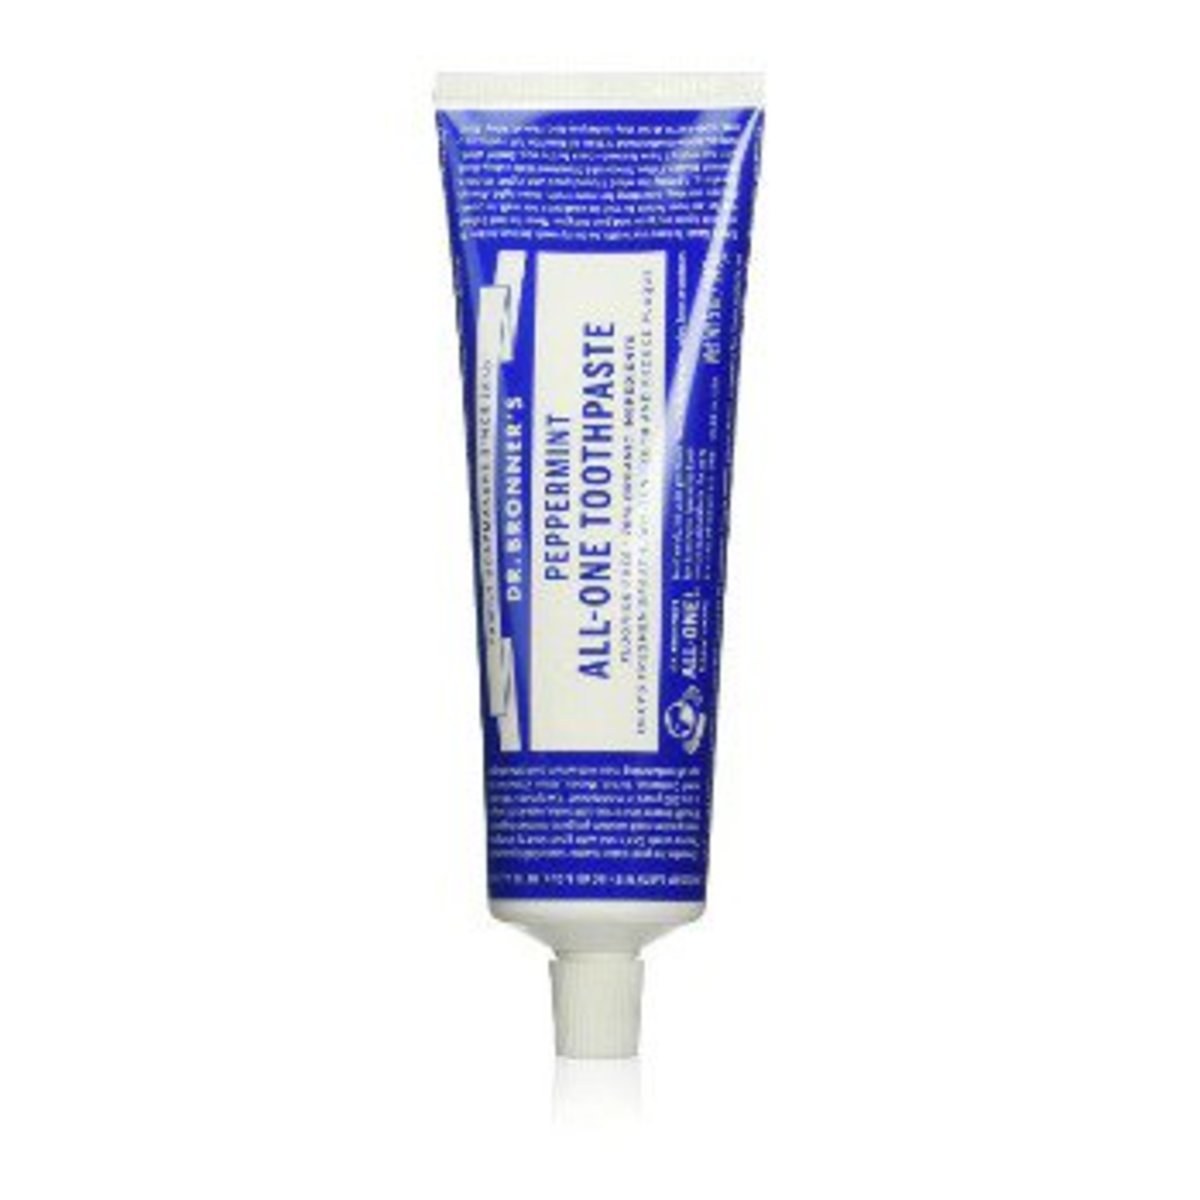 Dr. Bronner's Peppermint Toothpaste